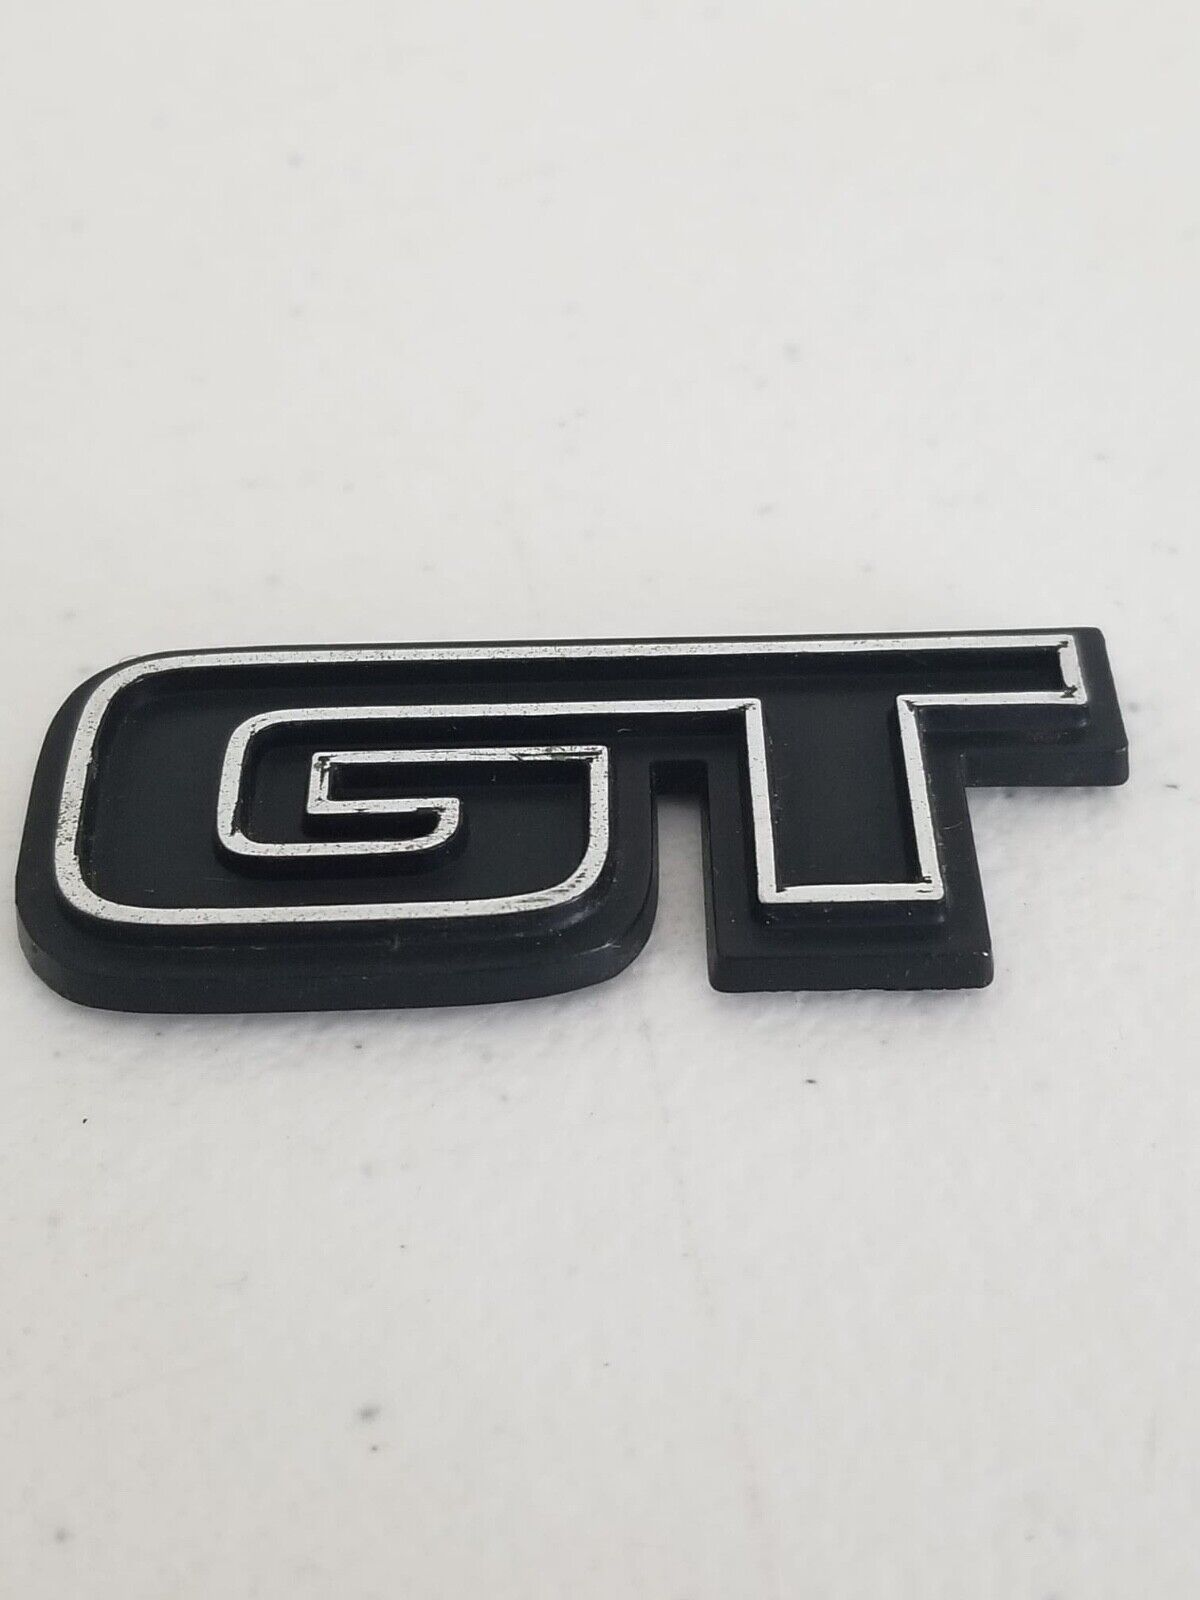 Rare Vintage 1960s Ford Mustang GT Emblem - Iconic Classic Car Logo Collectible - TreasuTiques